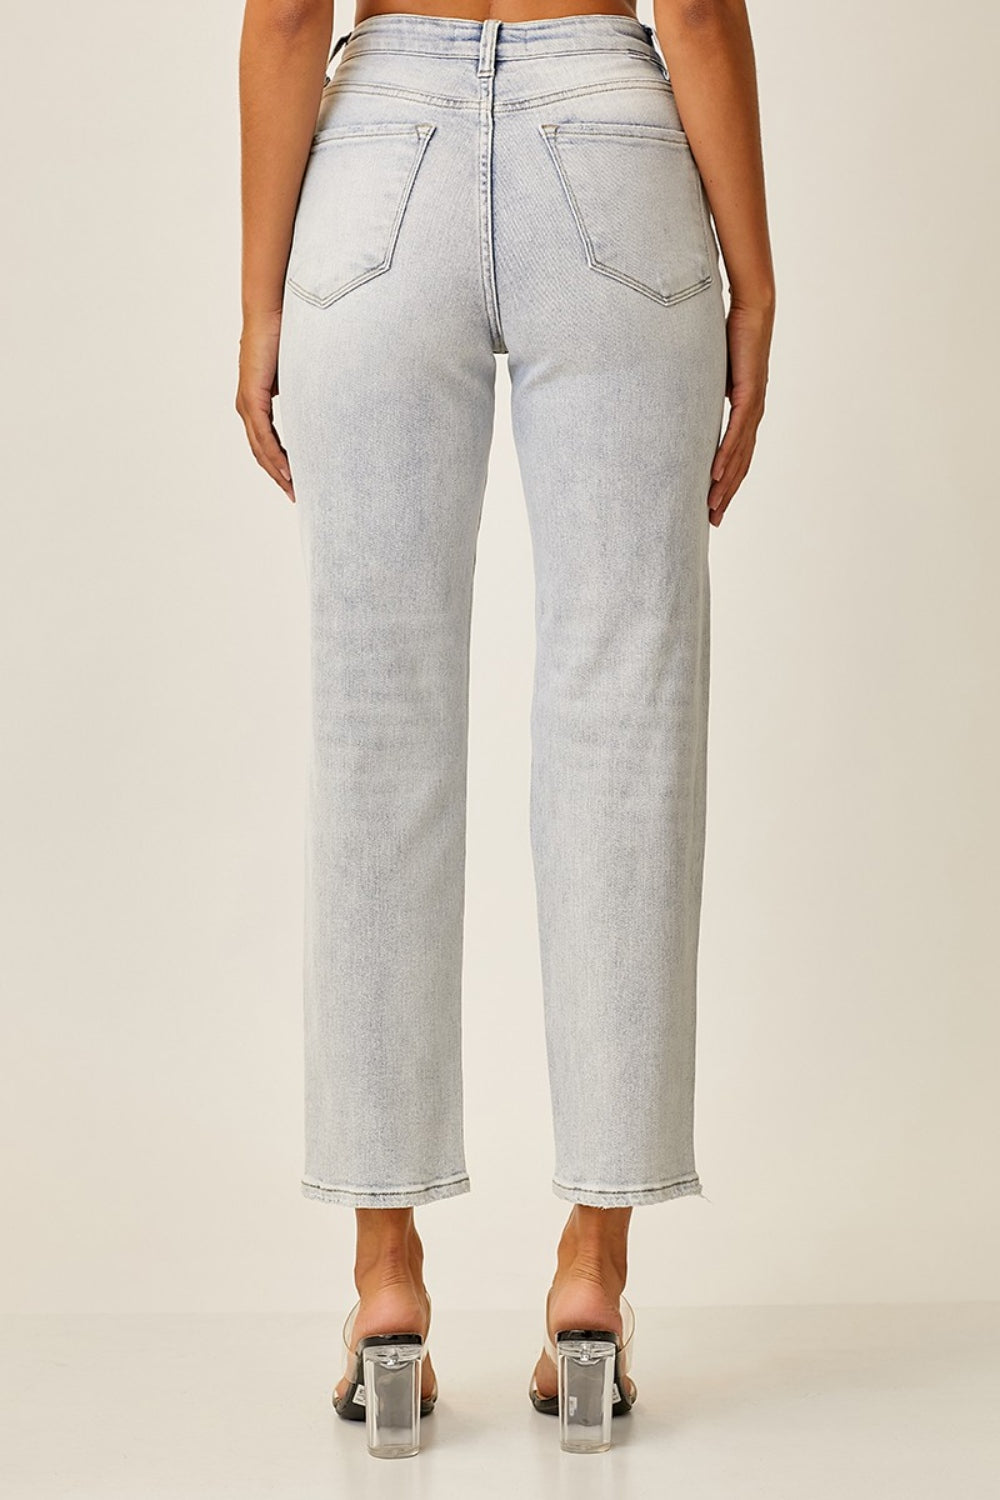 Hazel Blues® |  RISEN High Rise Distressed Relaxed Jeans